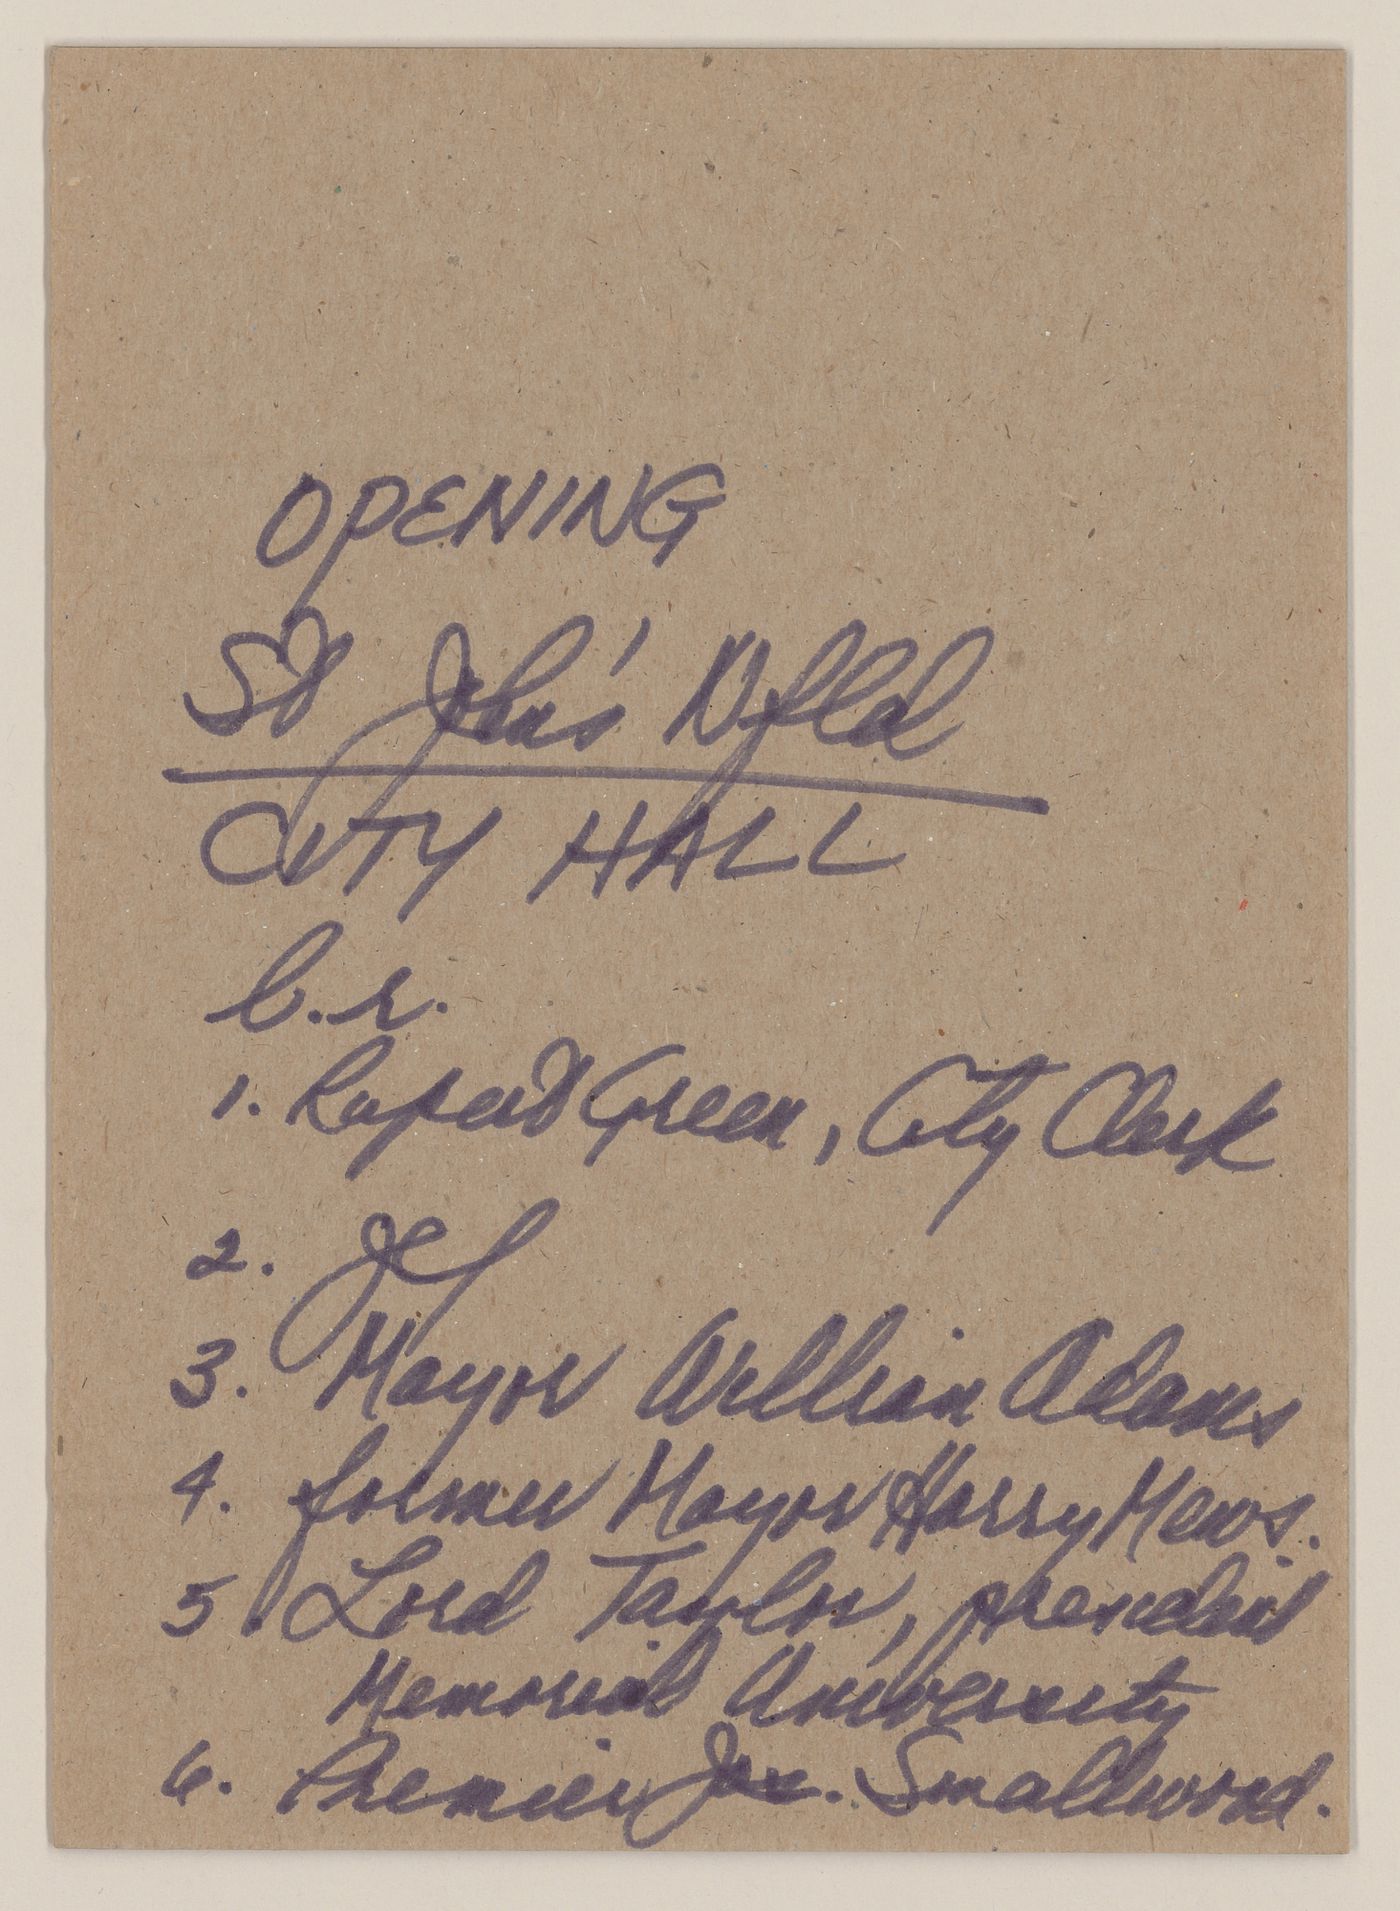 Note on speaking order for opening of St. John's City Hall, Newfoundland, Canada